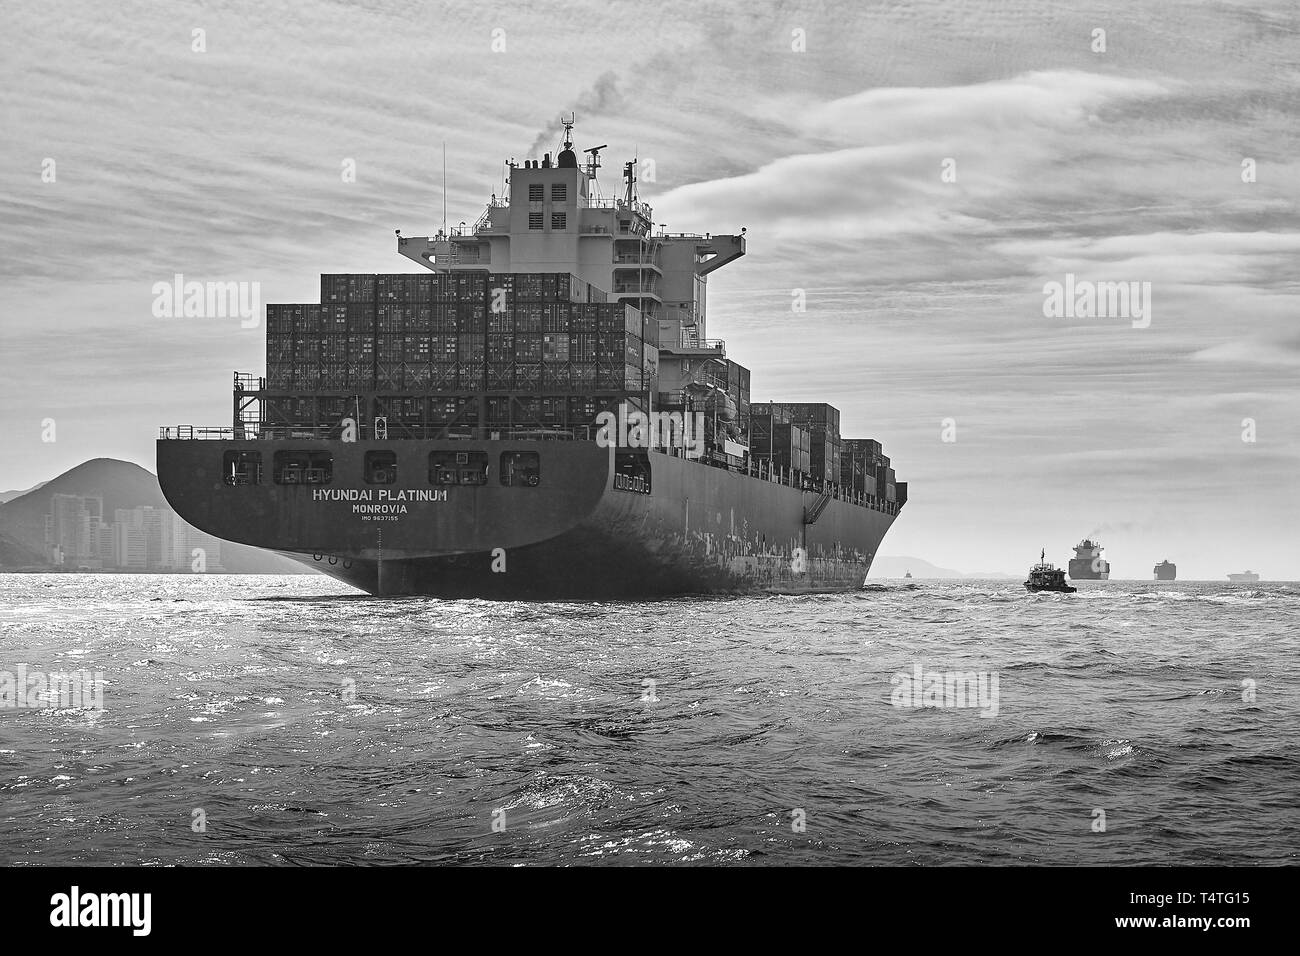 Moody Black And White Photo Of The Container Ship, Hyundai Platinum, Underway In The Busy East Lamma Shipping Channel, Hong Kong. Stock Photo